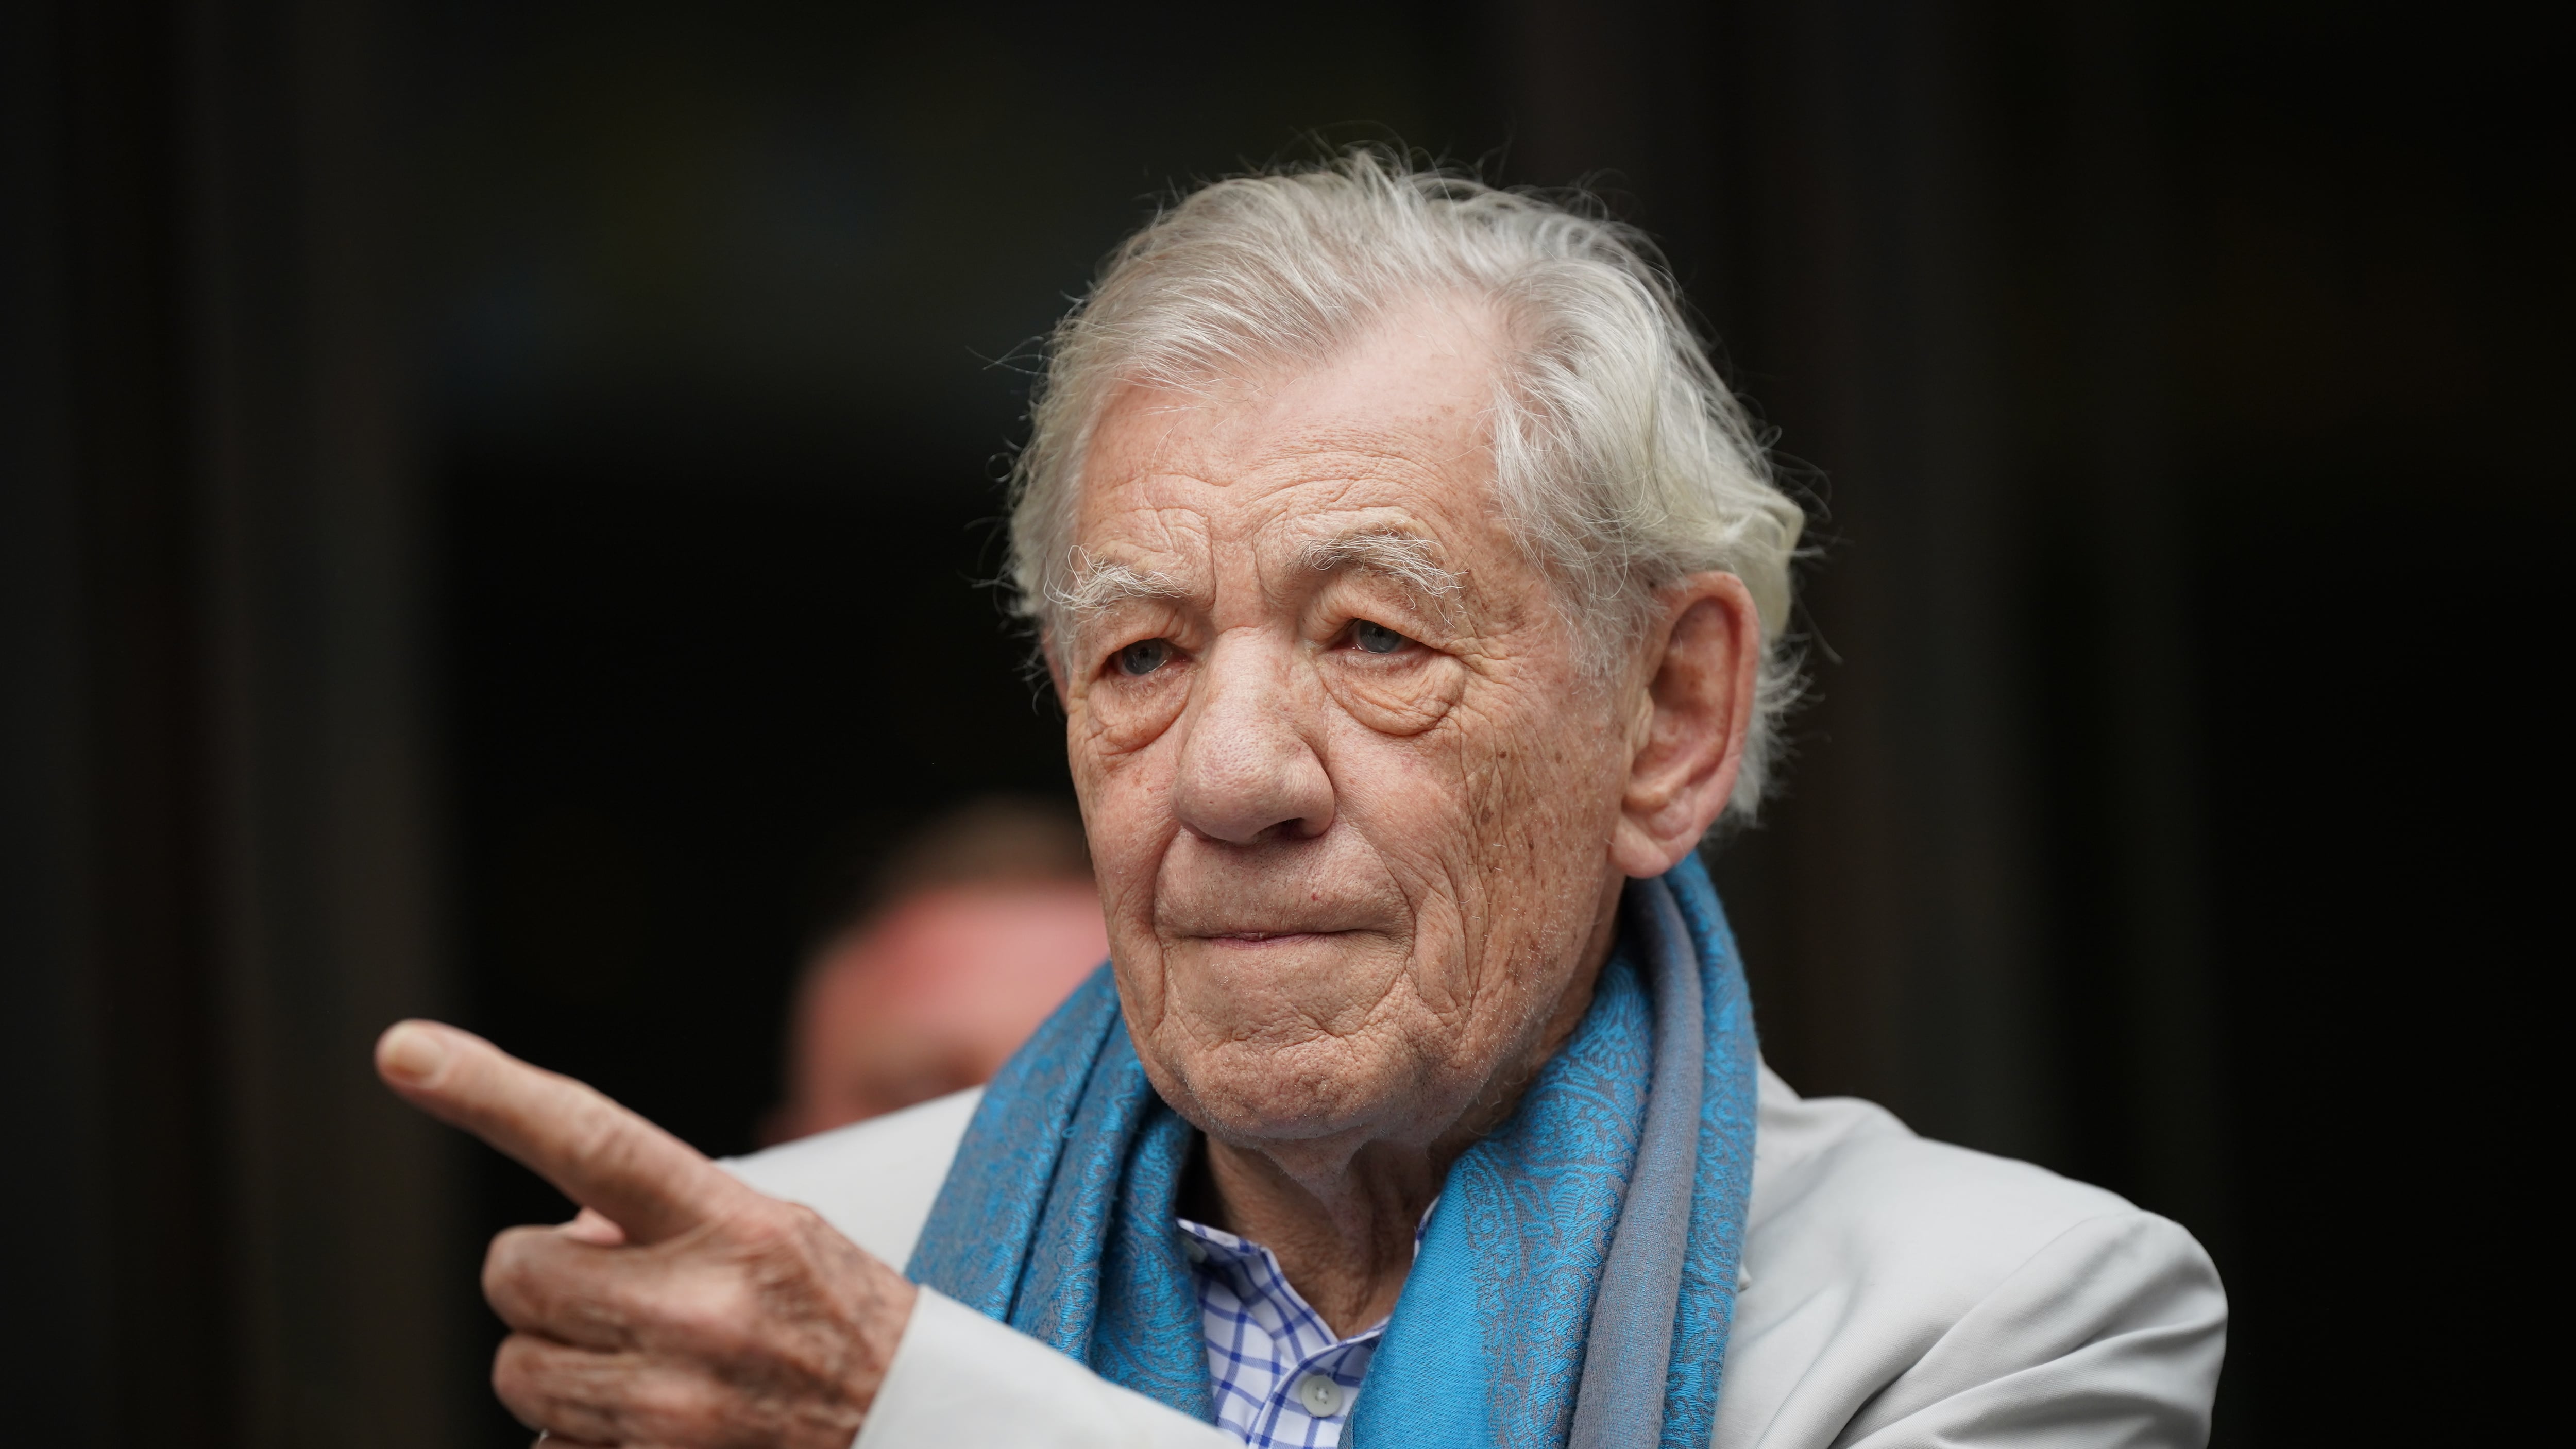 Sir Ian McKellen revealed he is having physiotherapy following his fall from a West End stage on Monday